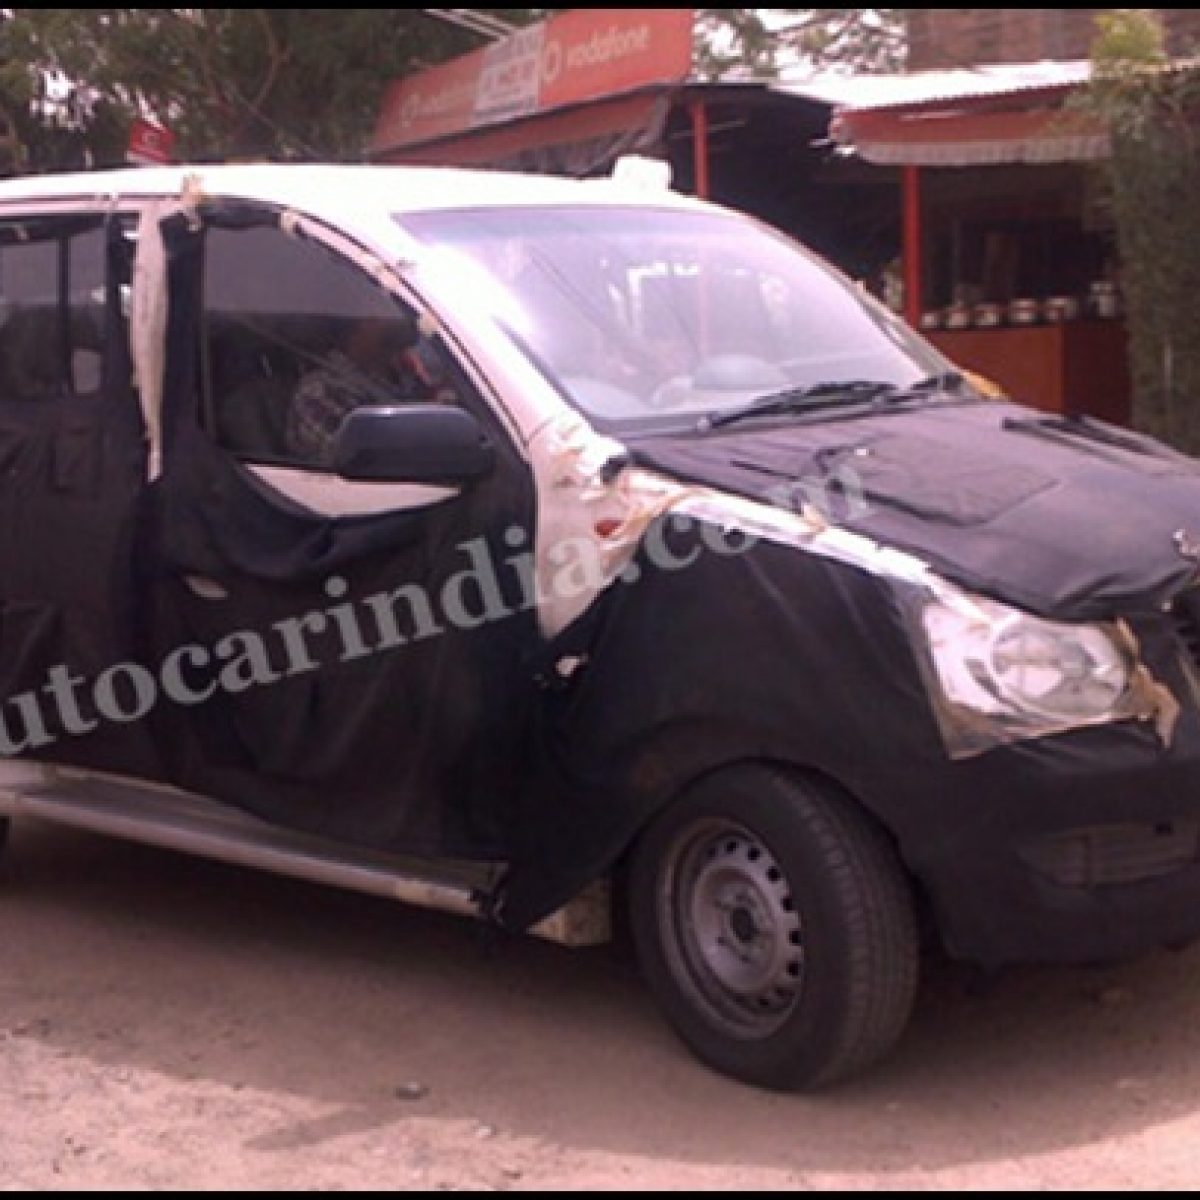 Compact Hatchback Of Mahindra Xylo Scoop Pictures Leaked